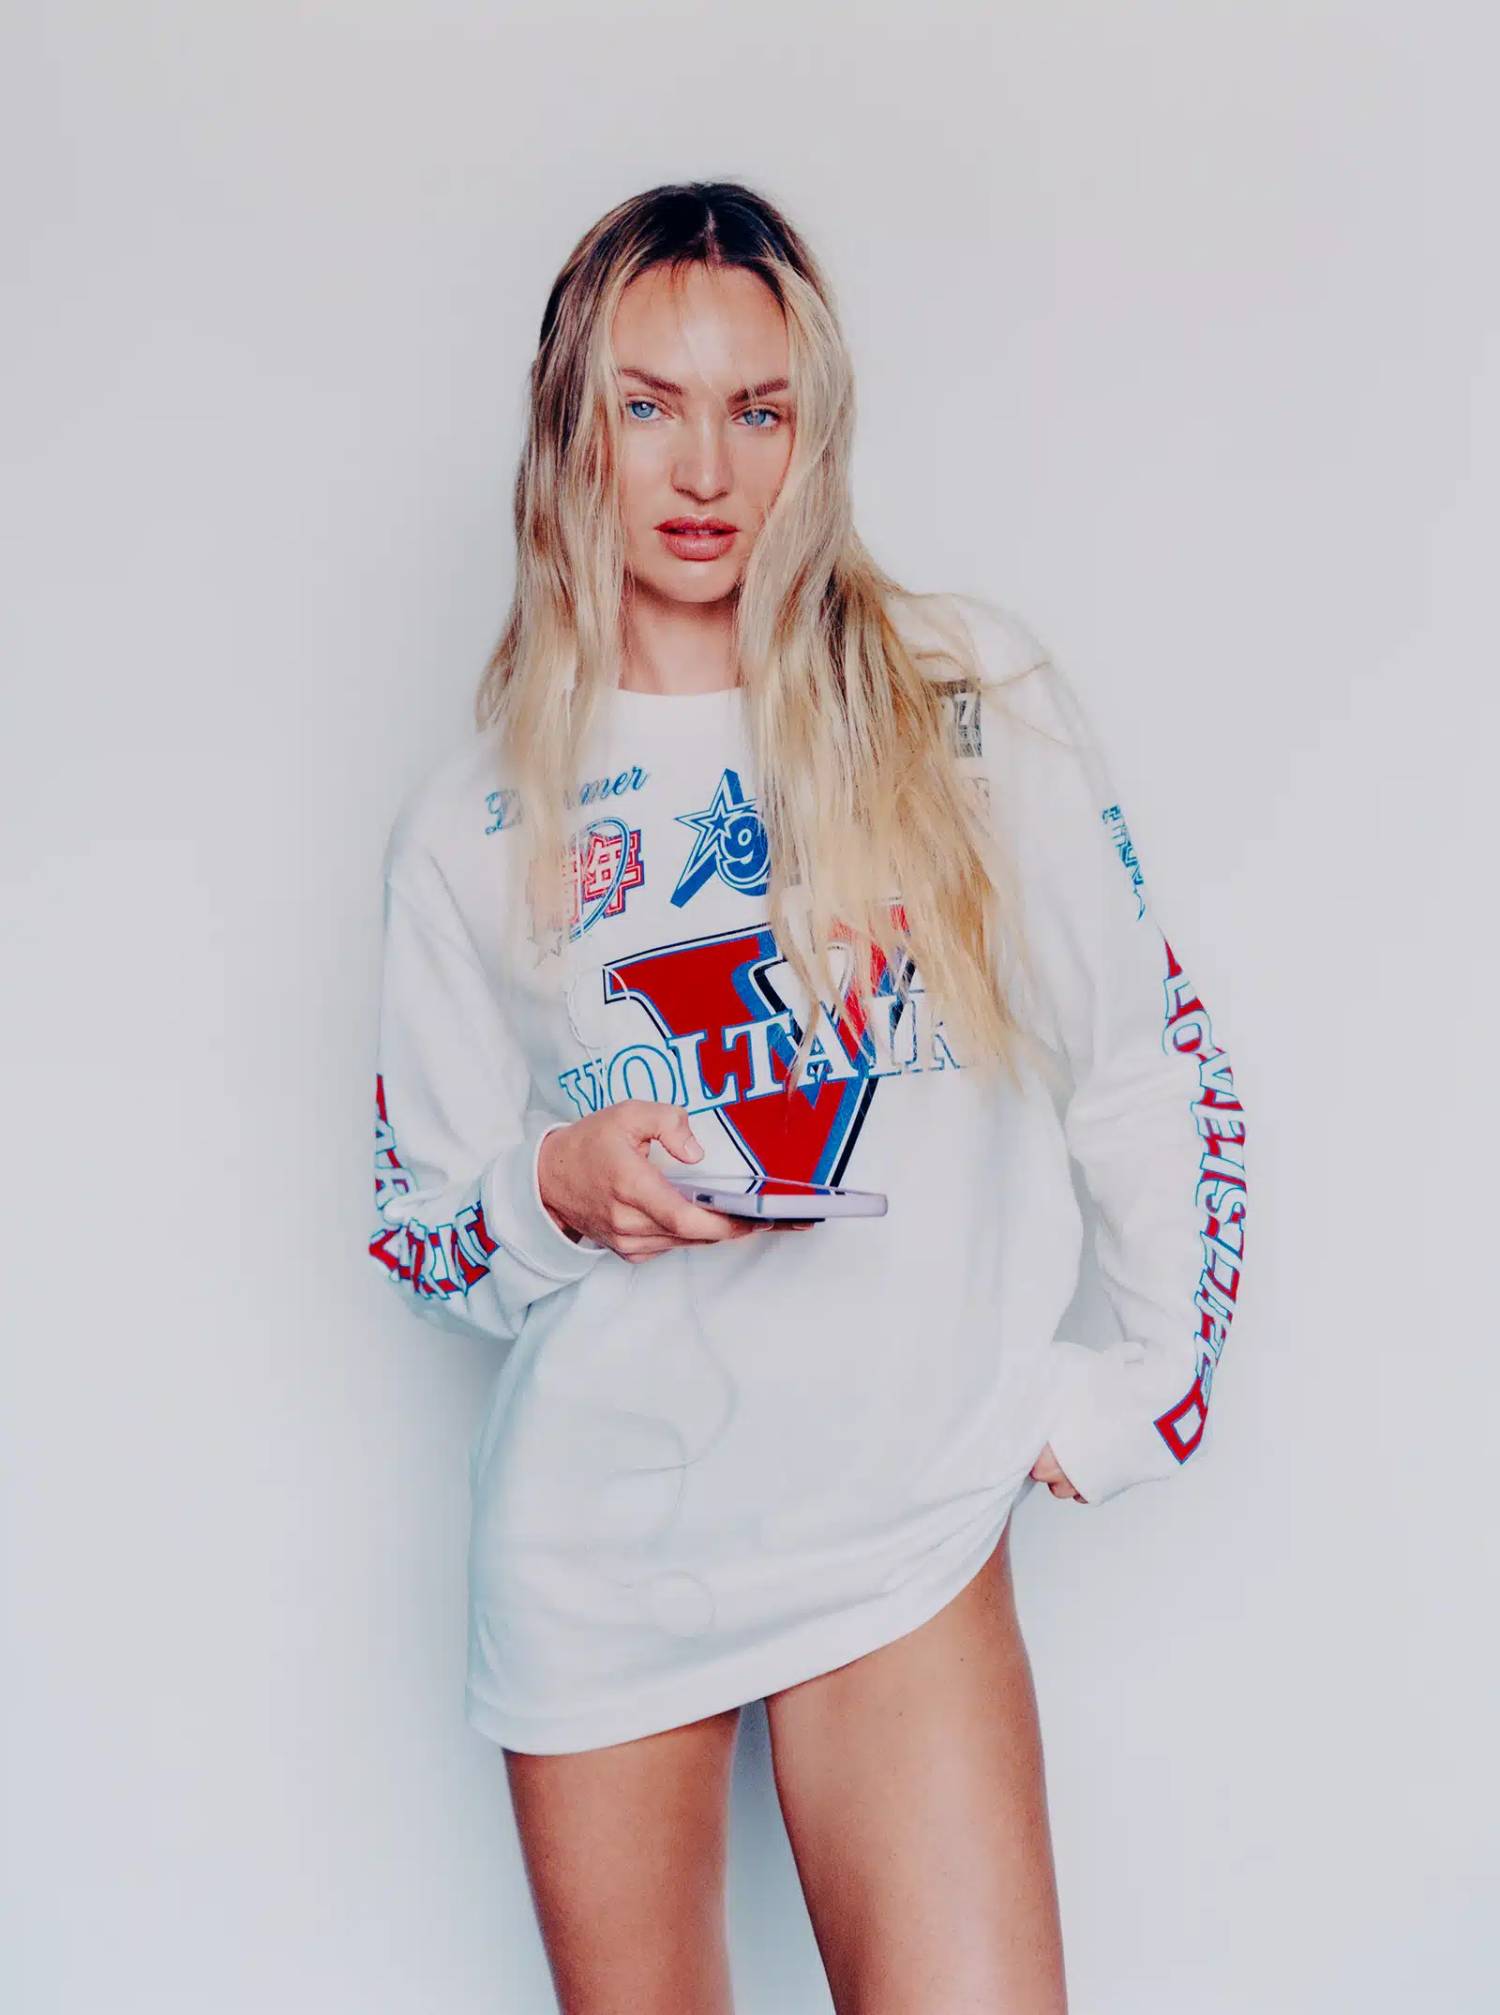 Candice Swanepoel in Zadig & Voltaire Noane Voltaire Printed Longsleeve T-Shirt for Puss Puss Magazine Fall-Winter 2023